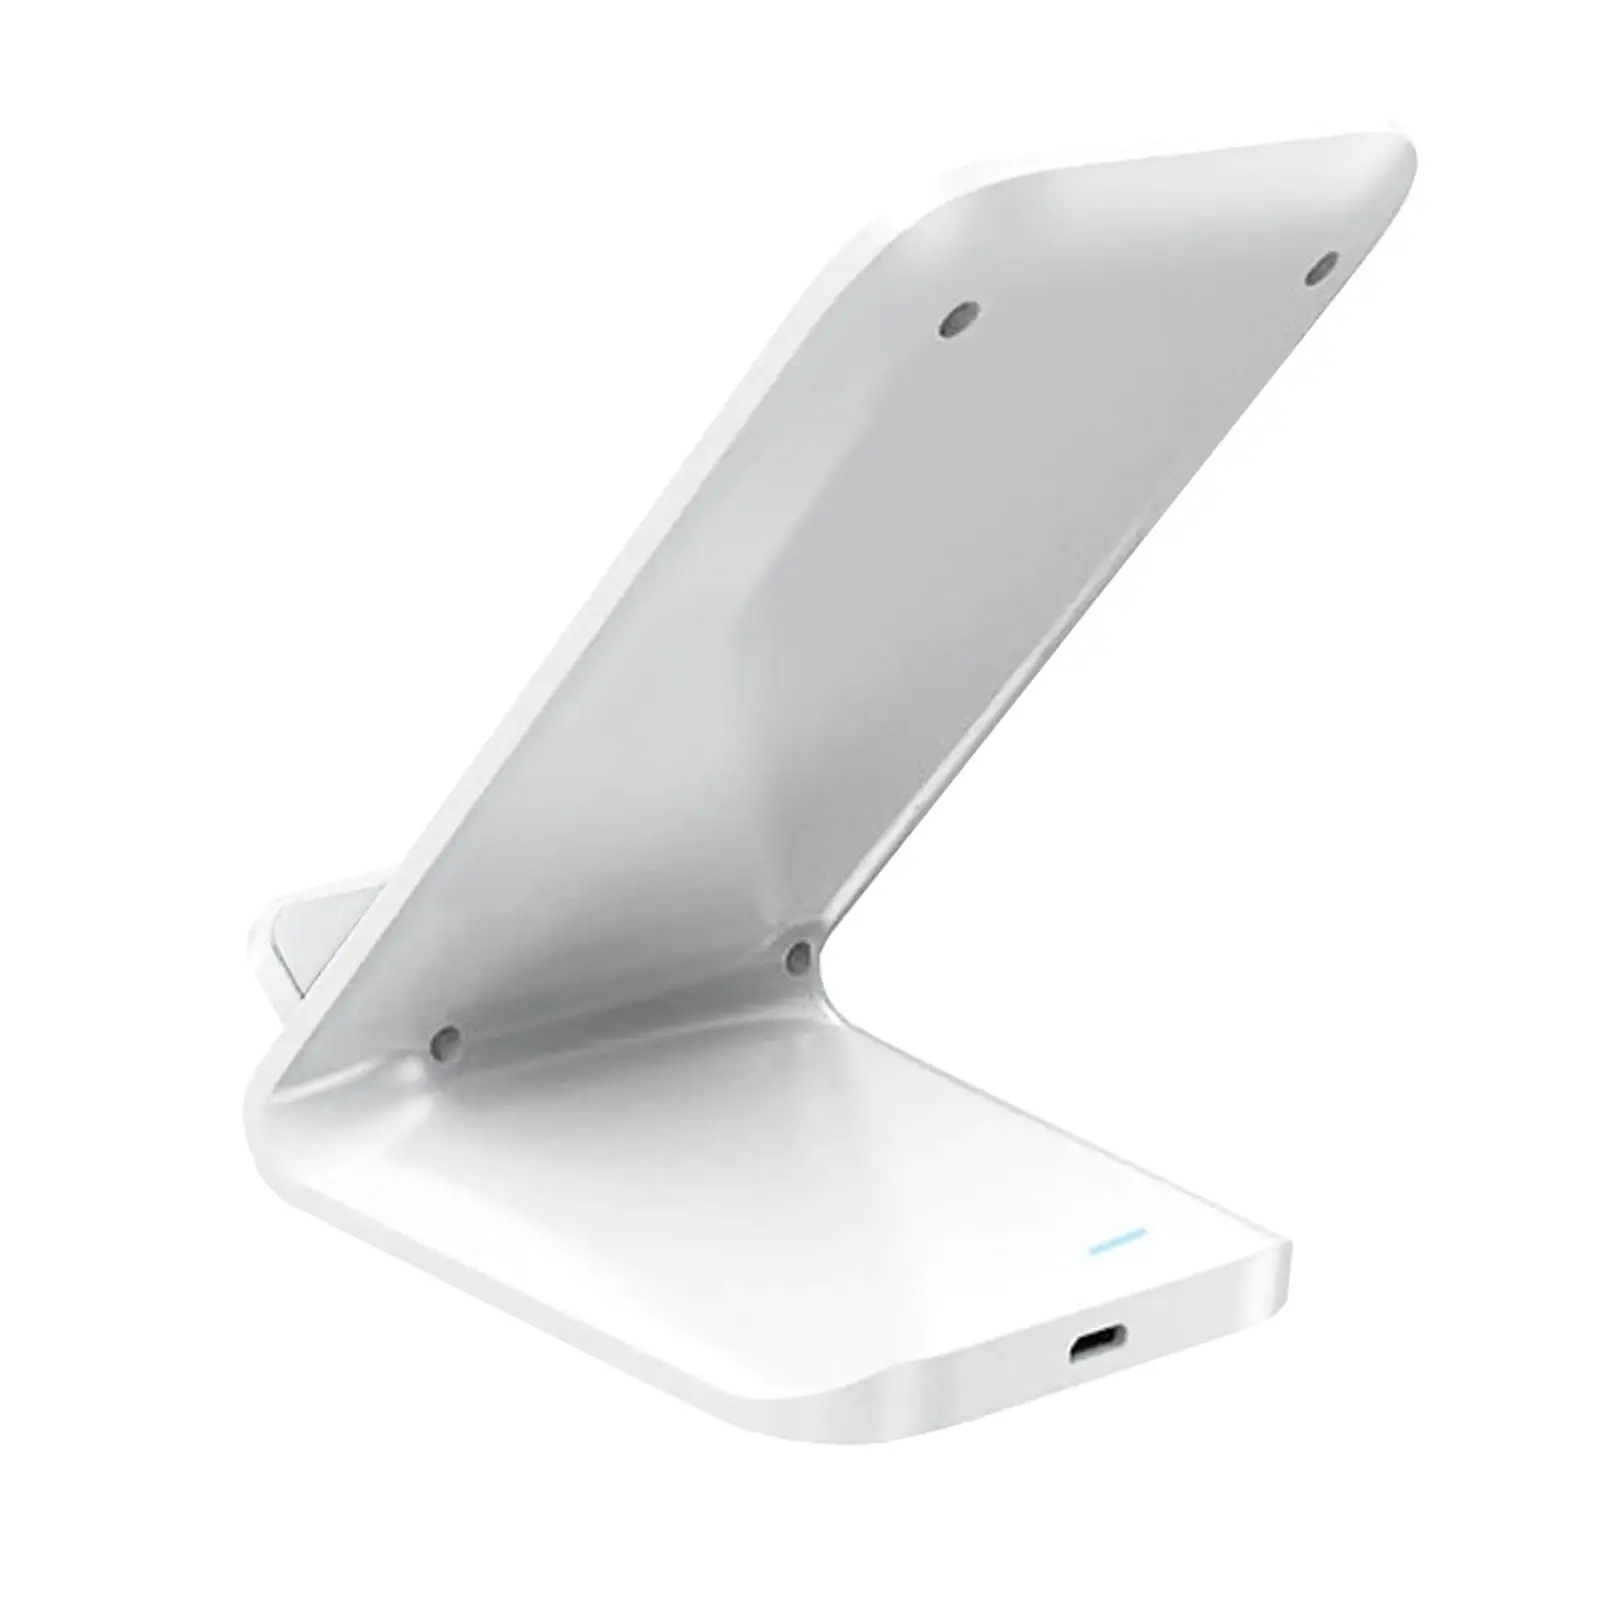 Adreama Fast Wireless Charging Stand enables you to charge your device quickly and conveniently without requiring cords or cables.